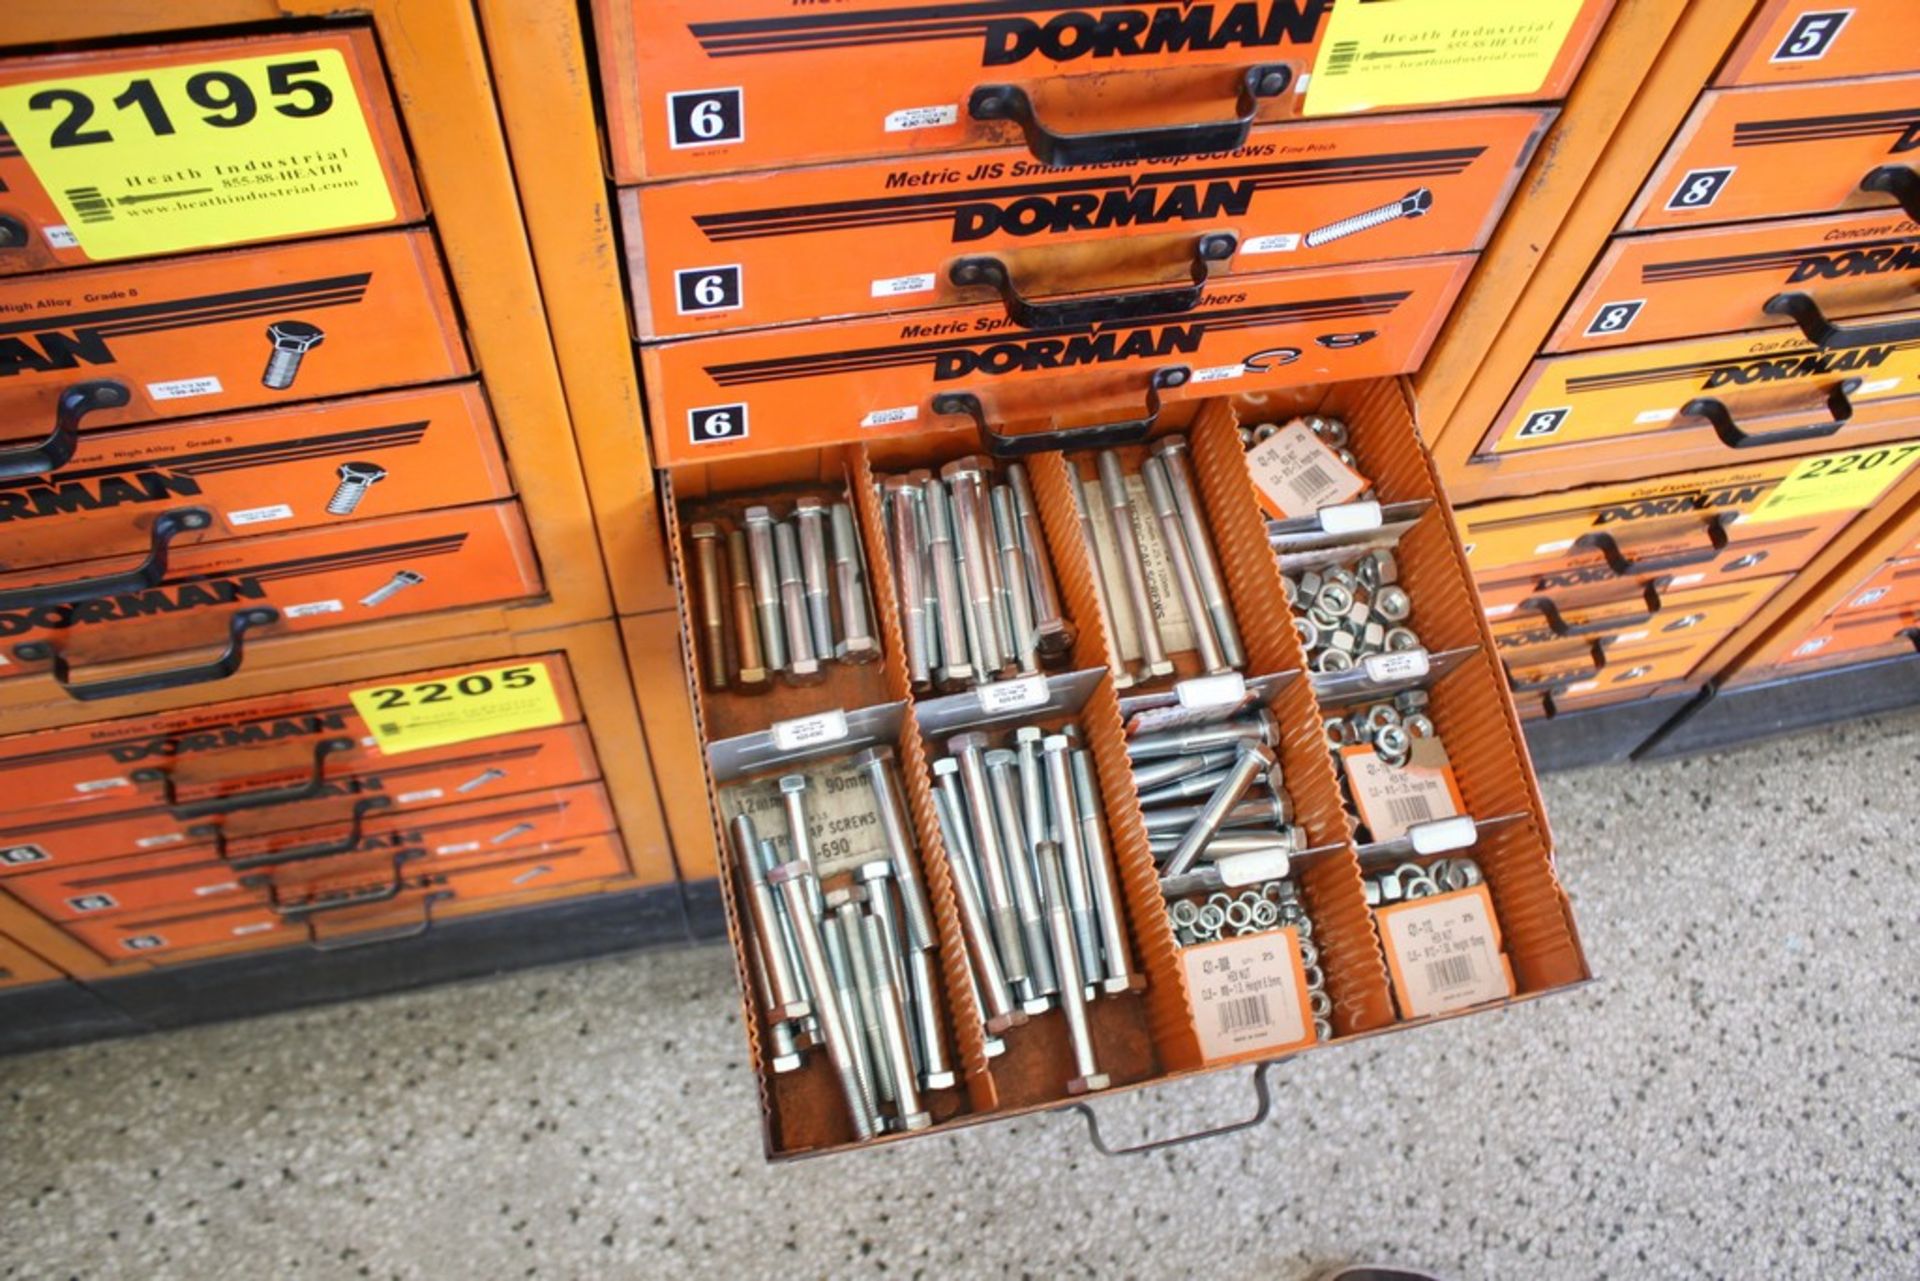 DORMAN FOUR DRAWER CABINET, CONTENTS INCLUDES METRIC NUTS, WASHERS AND CAP SCREWS - Image 5 of 5